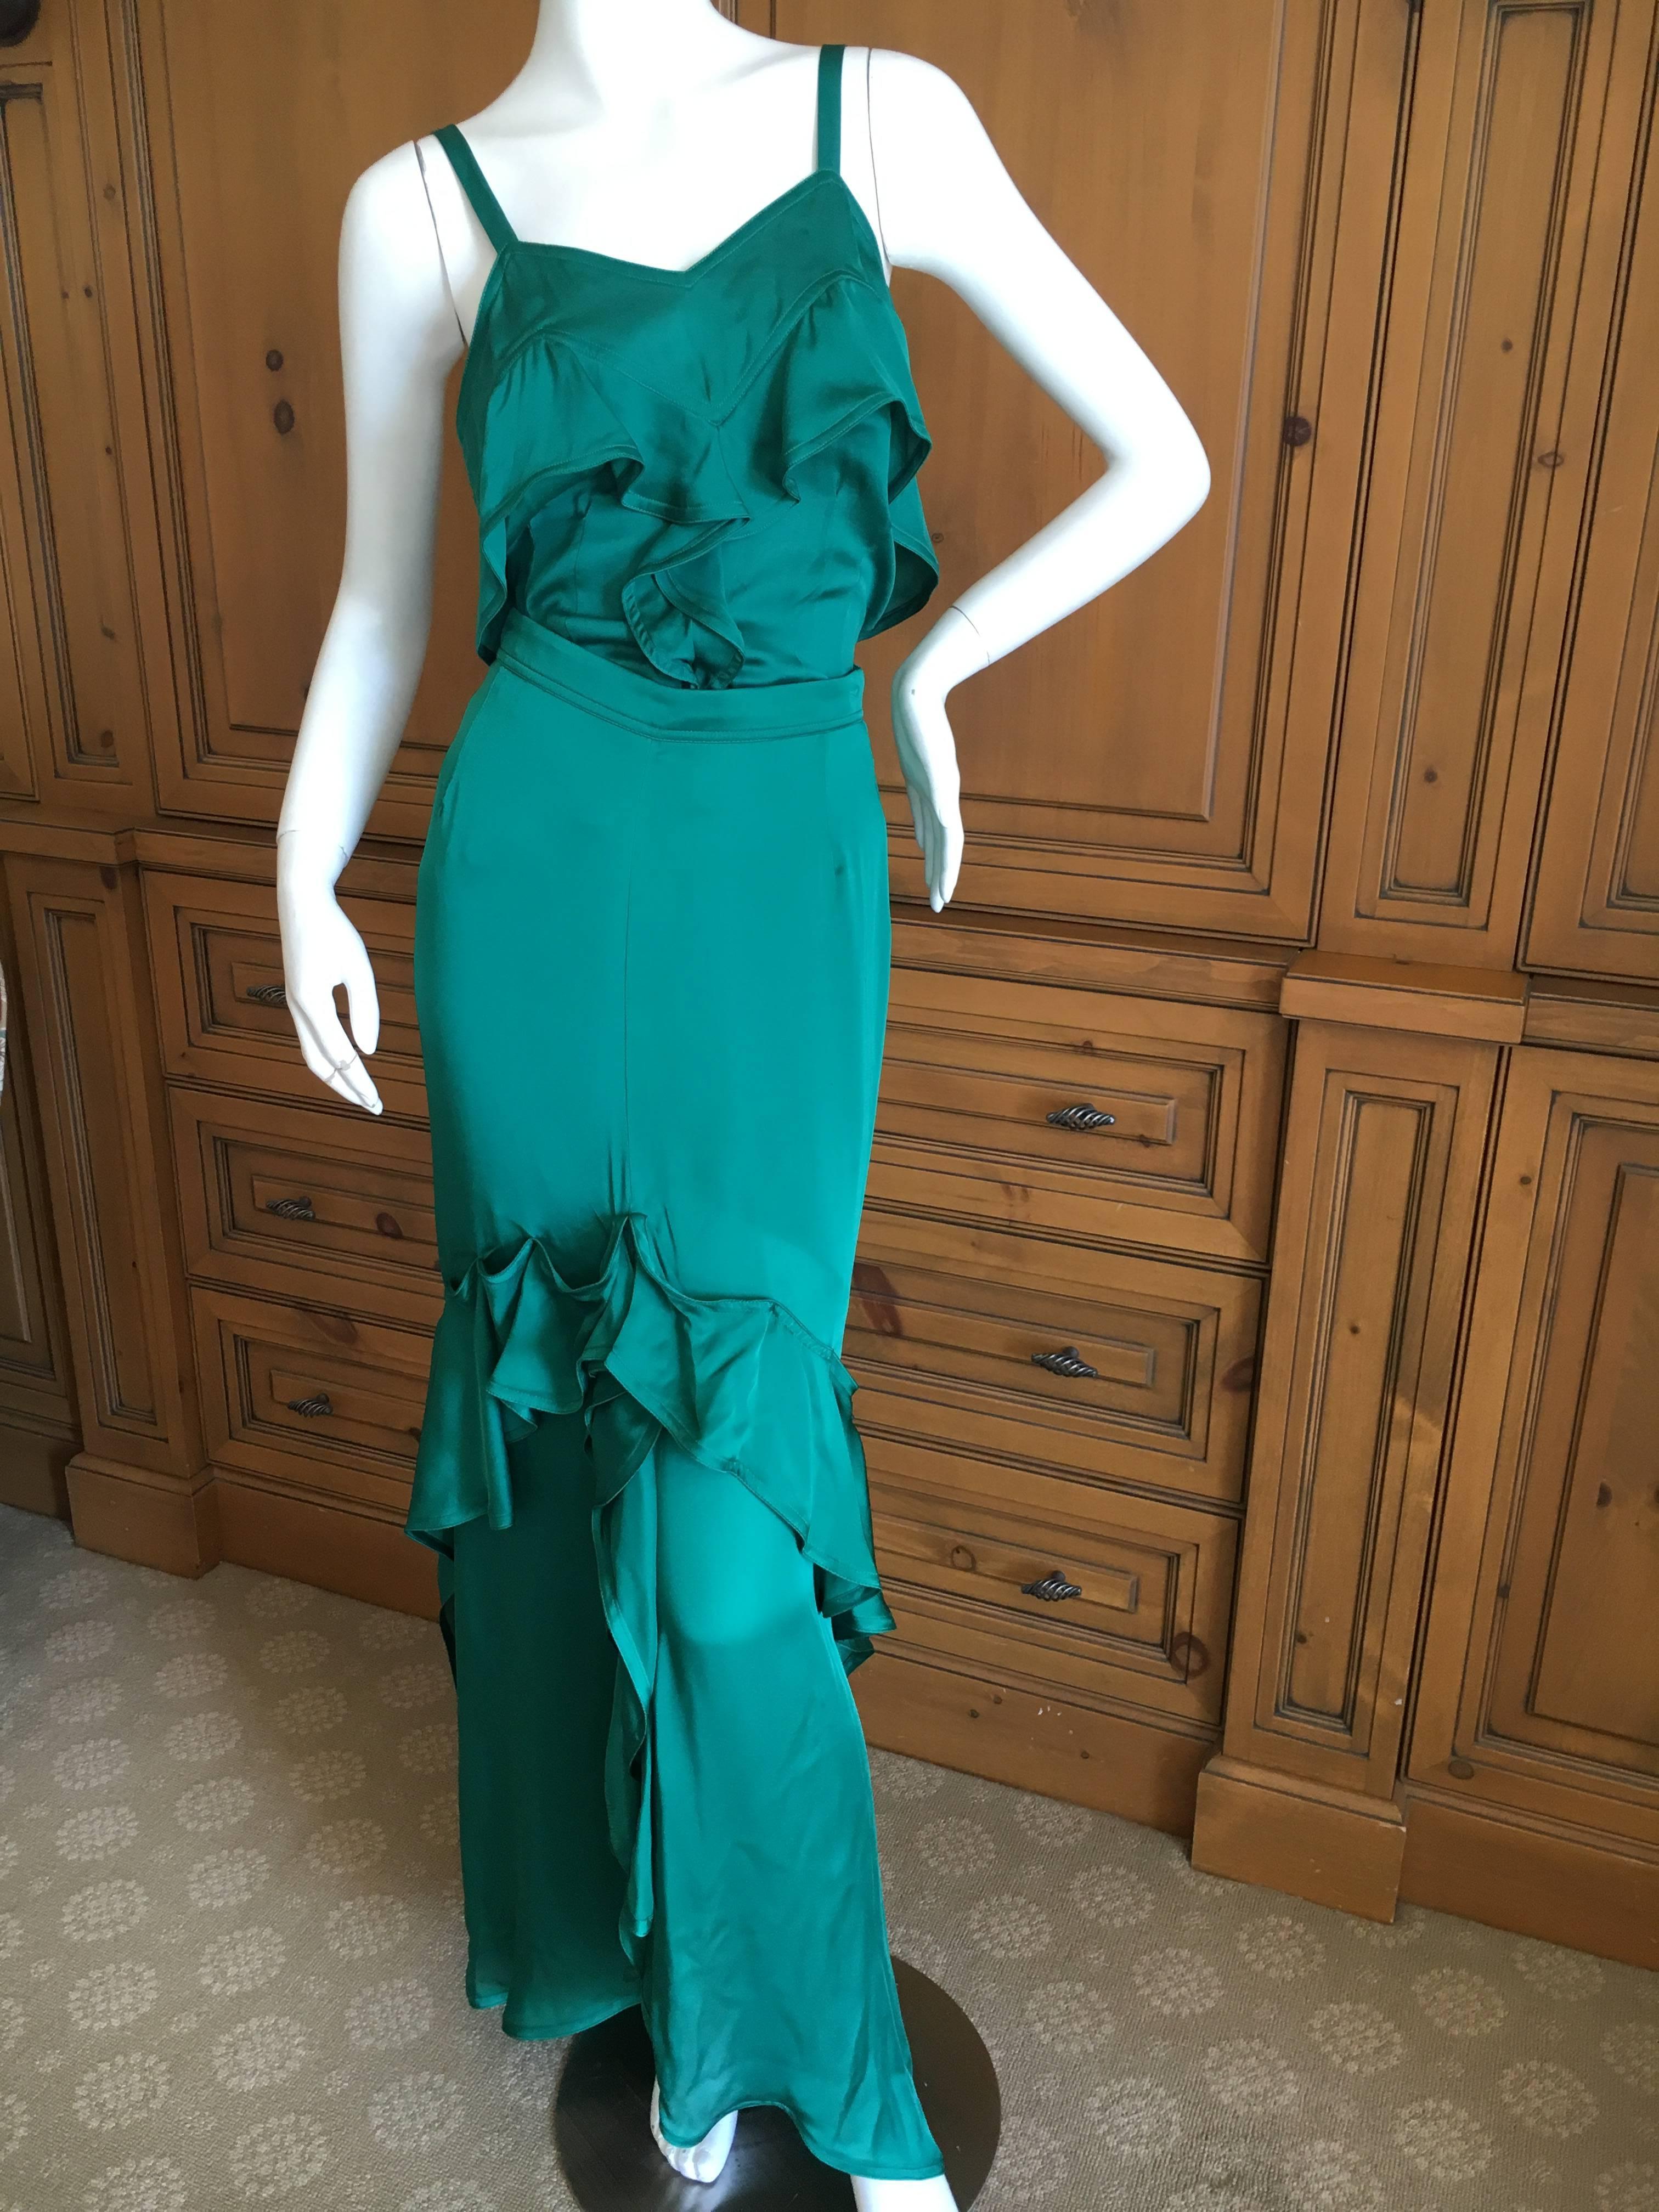 Yves Saint Laurent by Tom Ford 2003 Two Piece Ruffled Silk Dress New with Tags For Sale 3